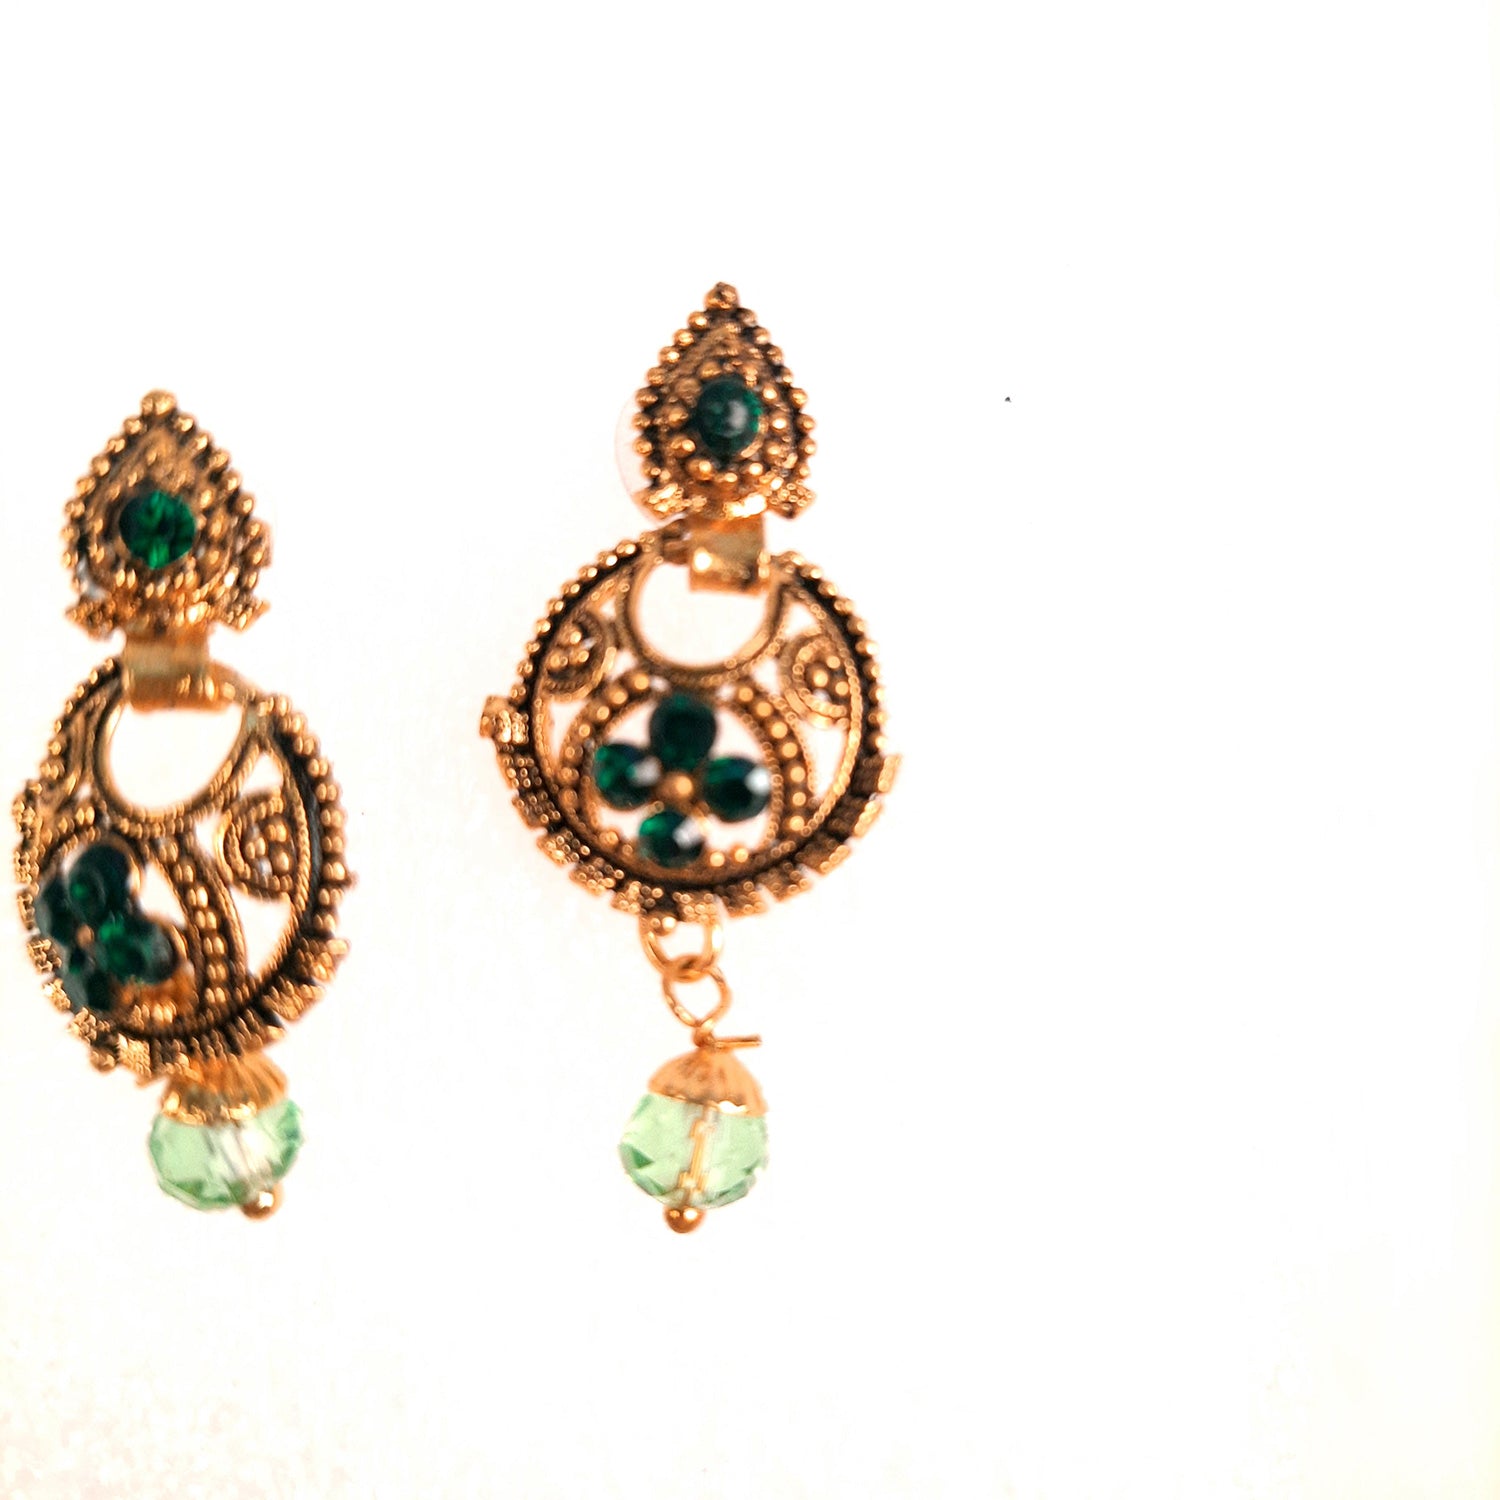 Earrings Jhumka / Danglers - for Girls and Women | Latest Stylish Fashion Jewellery | Gifts for Her, Friendship Day, Valentine's Day Gift - apkamart